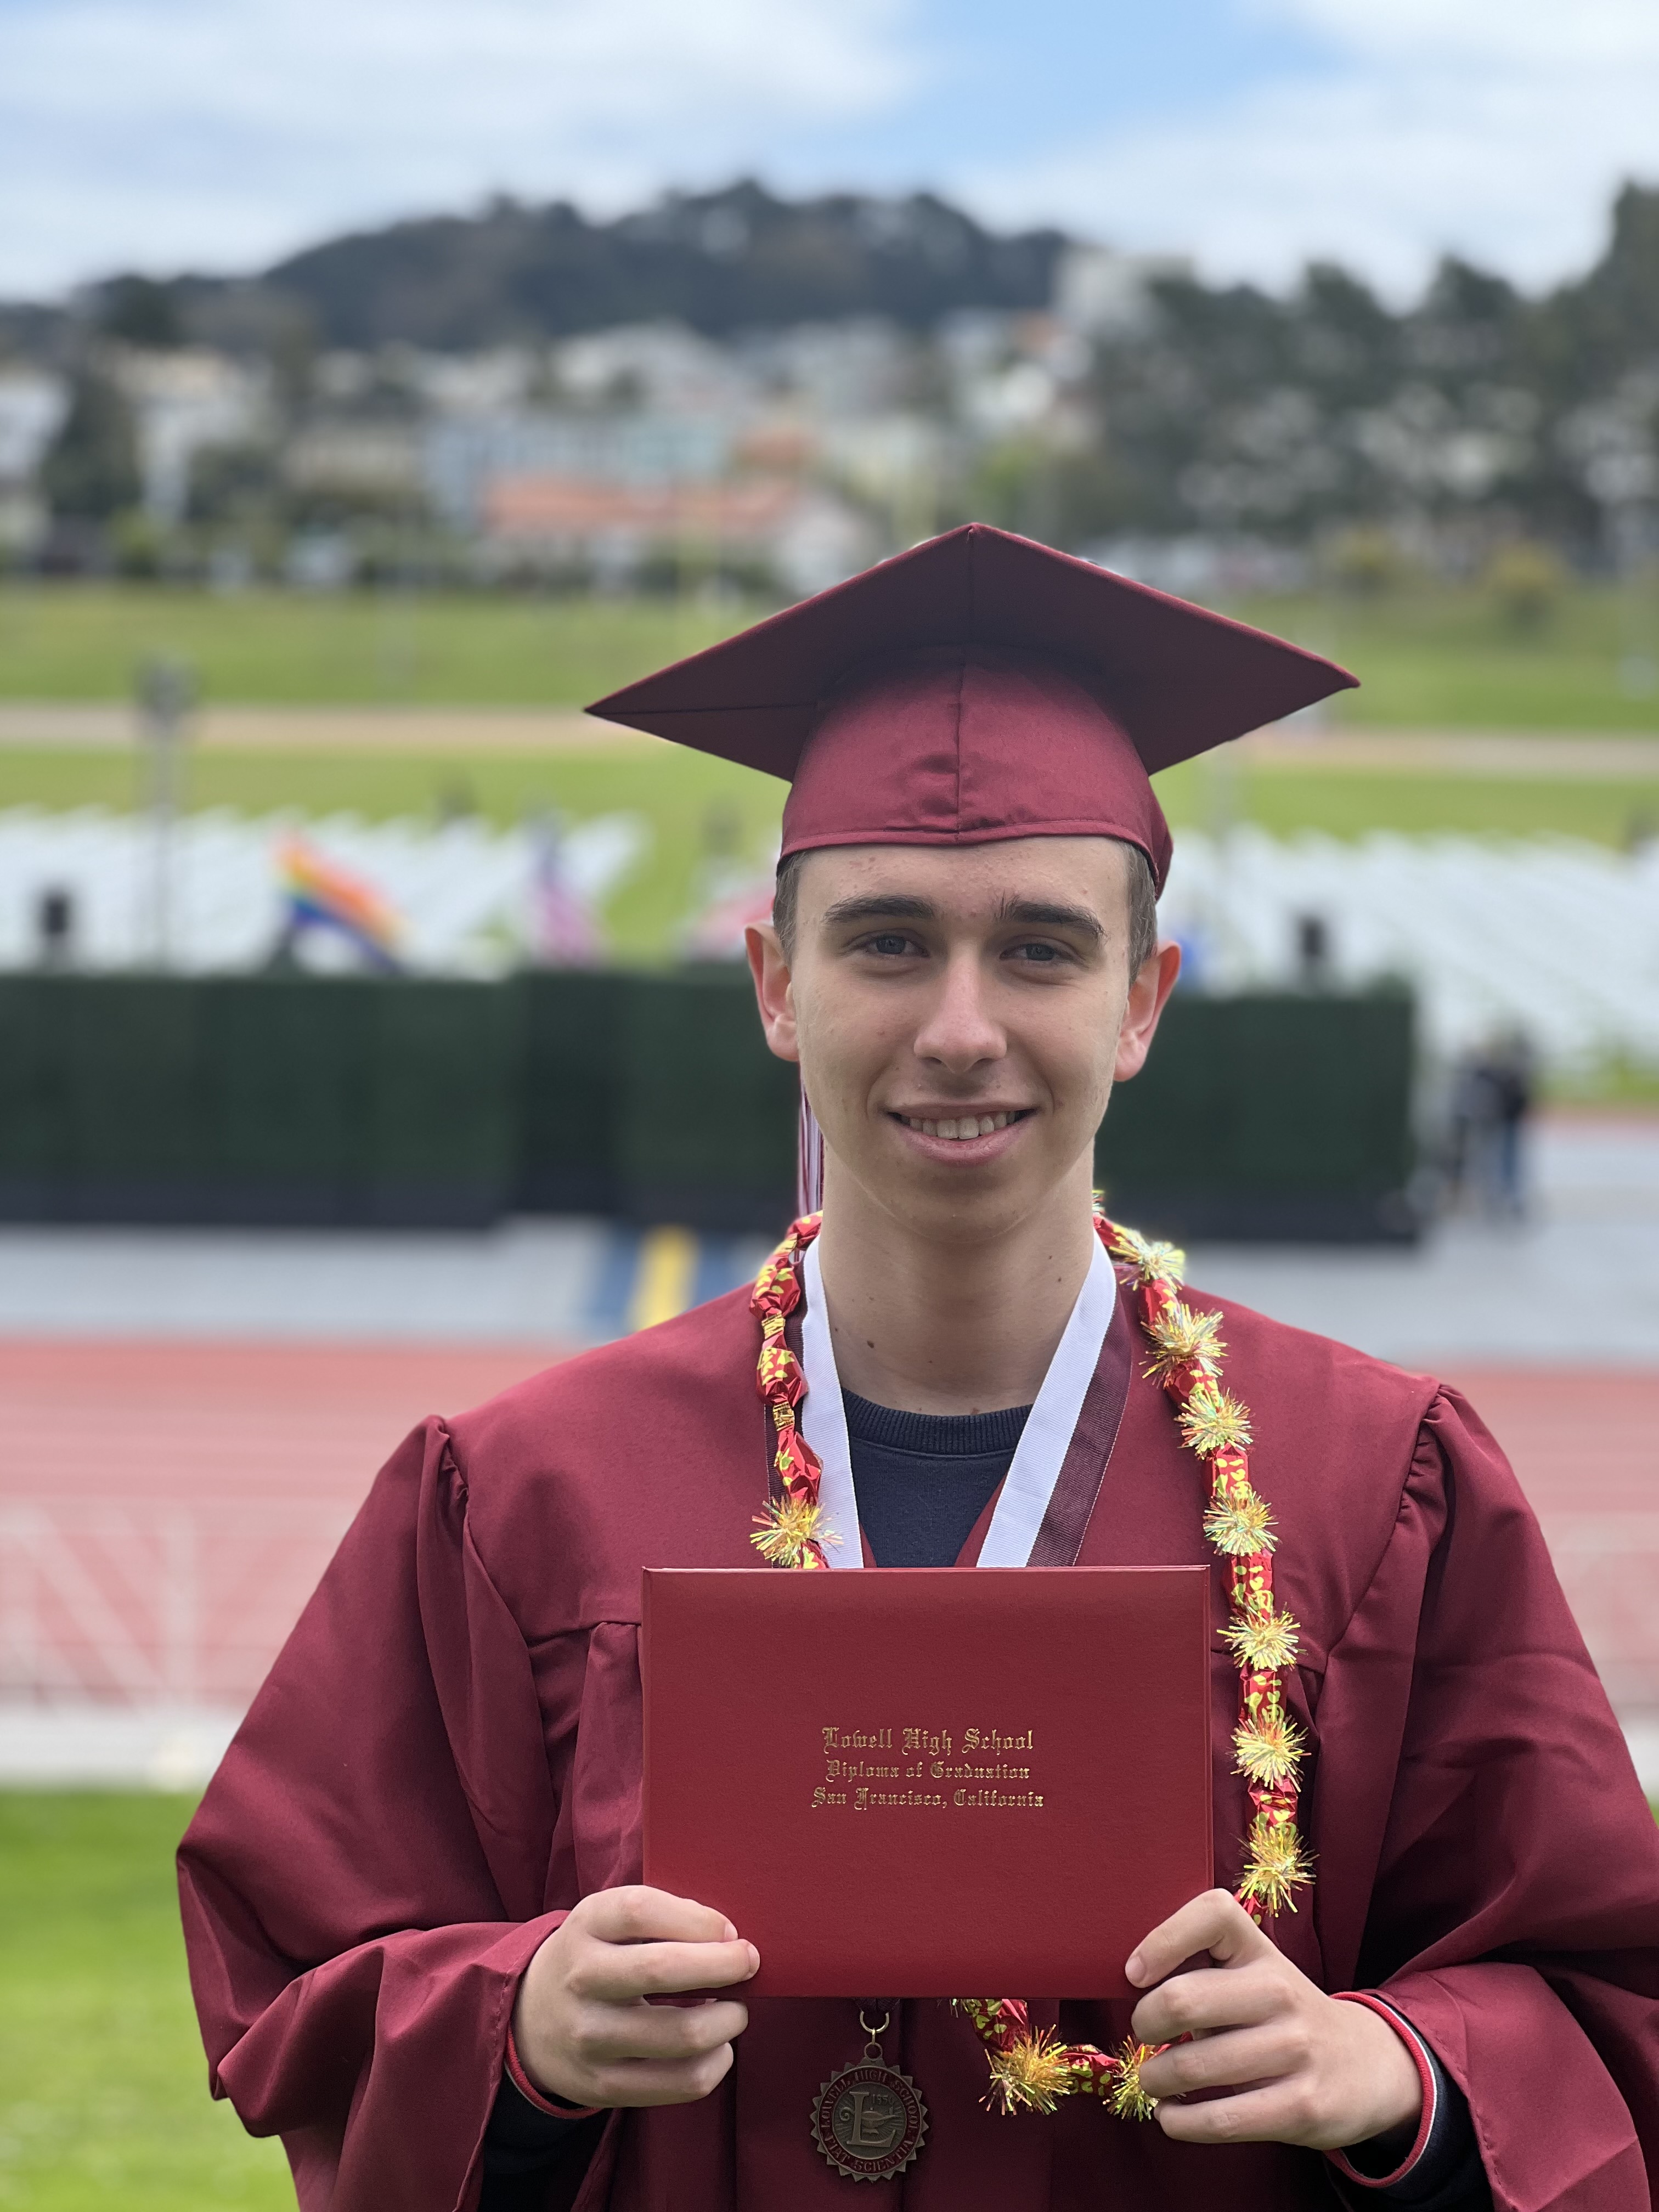 A young graduate in a maroon cap and gown holding a diploma, wearing a lei and medal, with a blurred background.